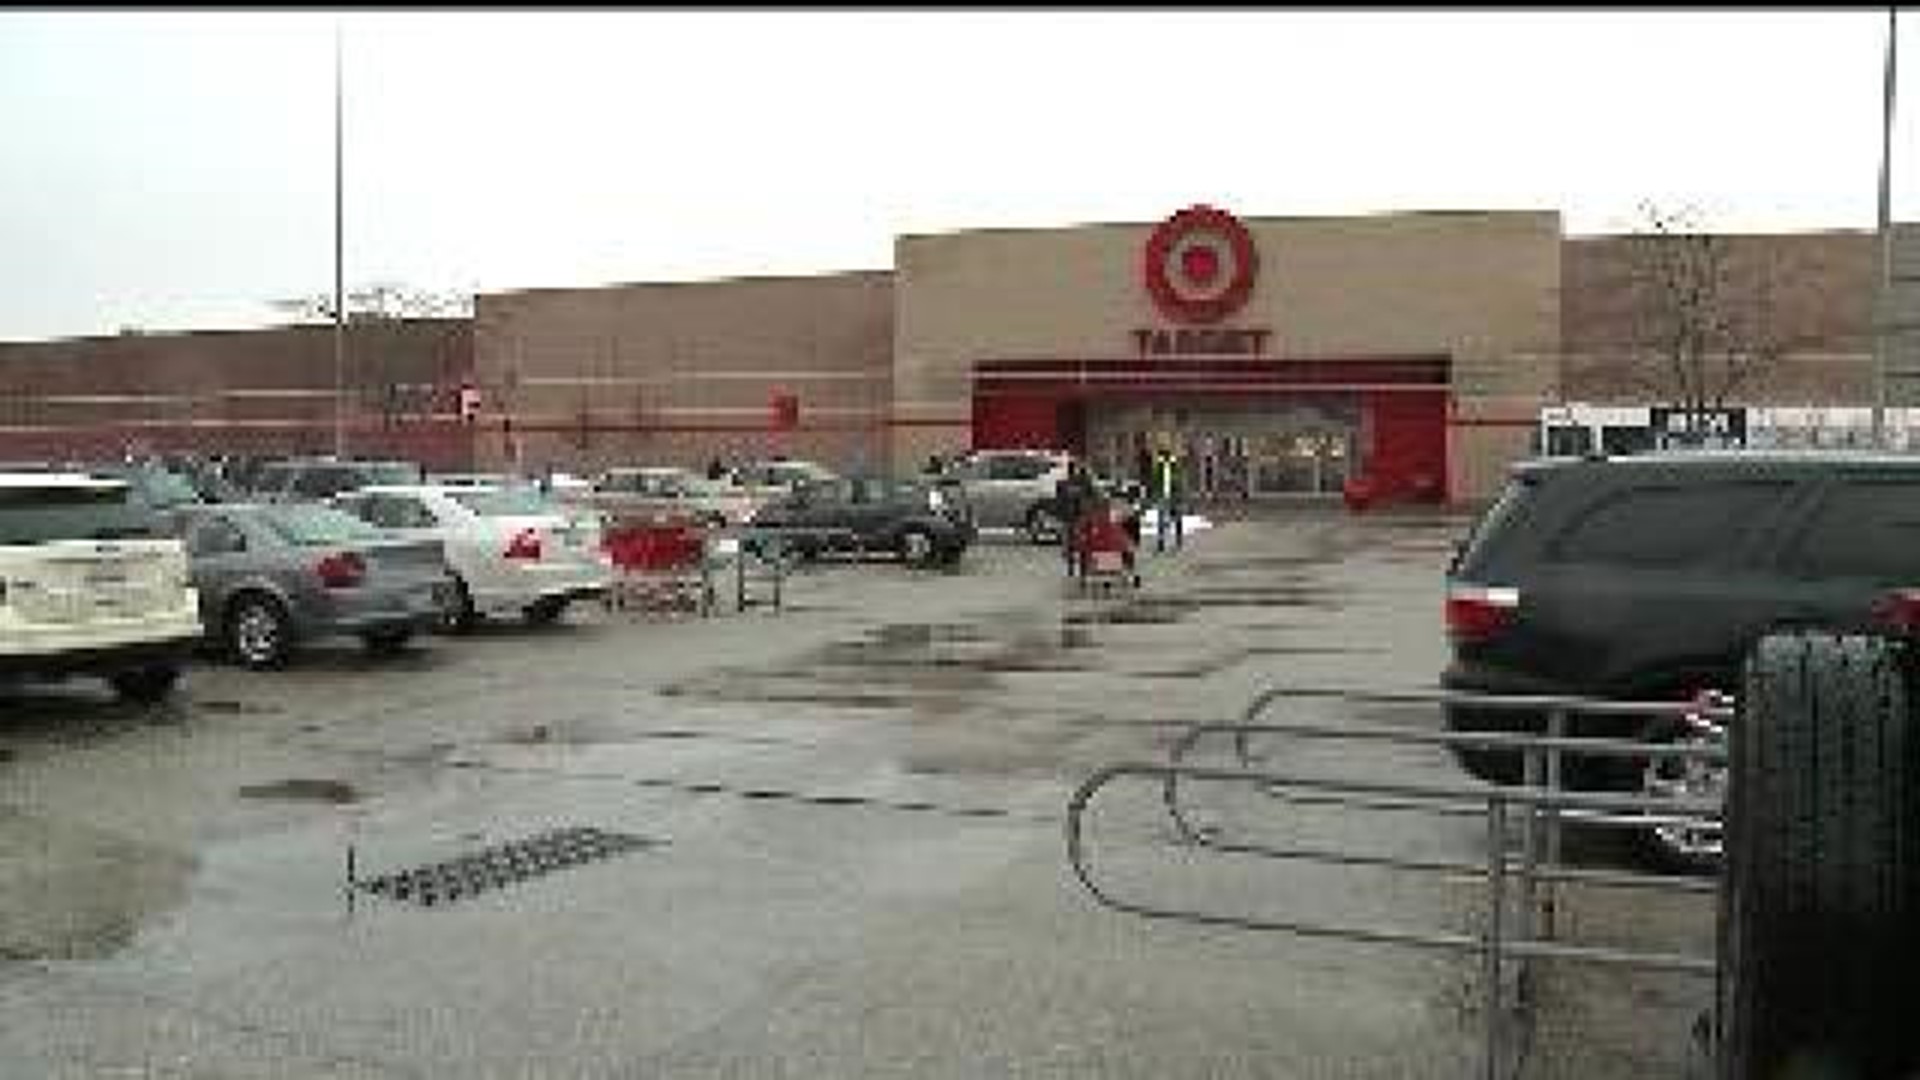 Healthcare options change for Target employees